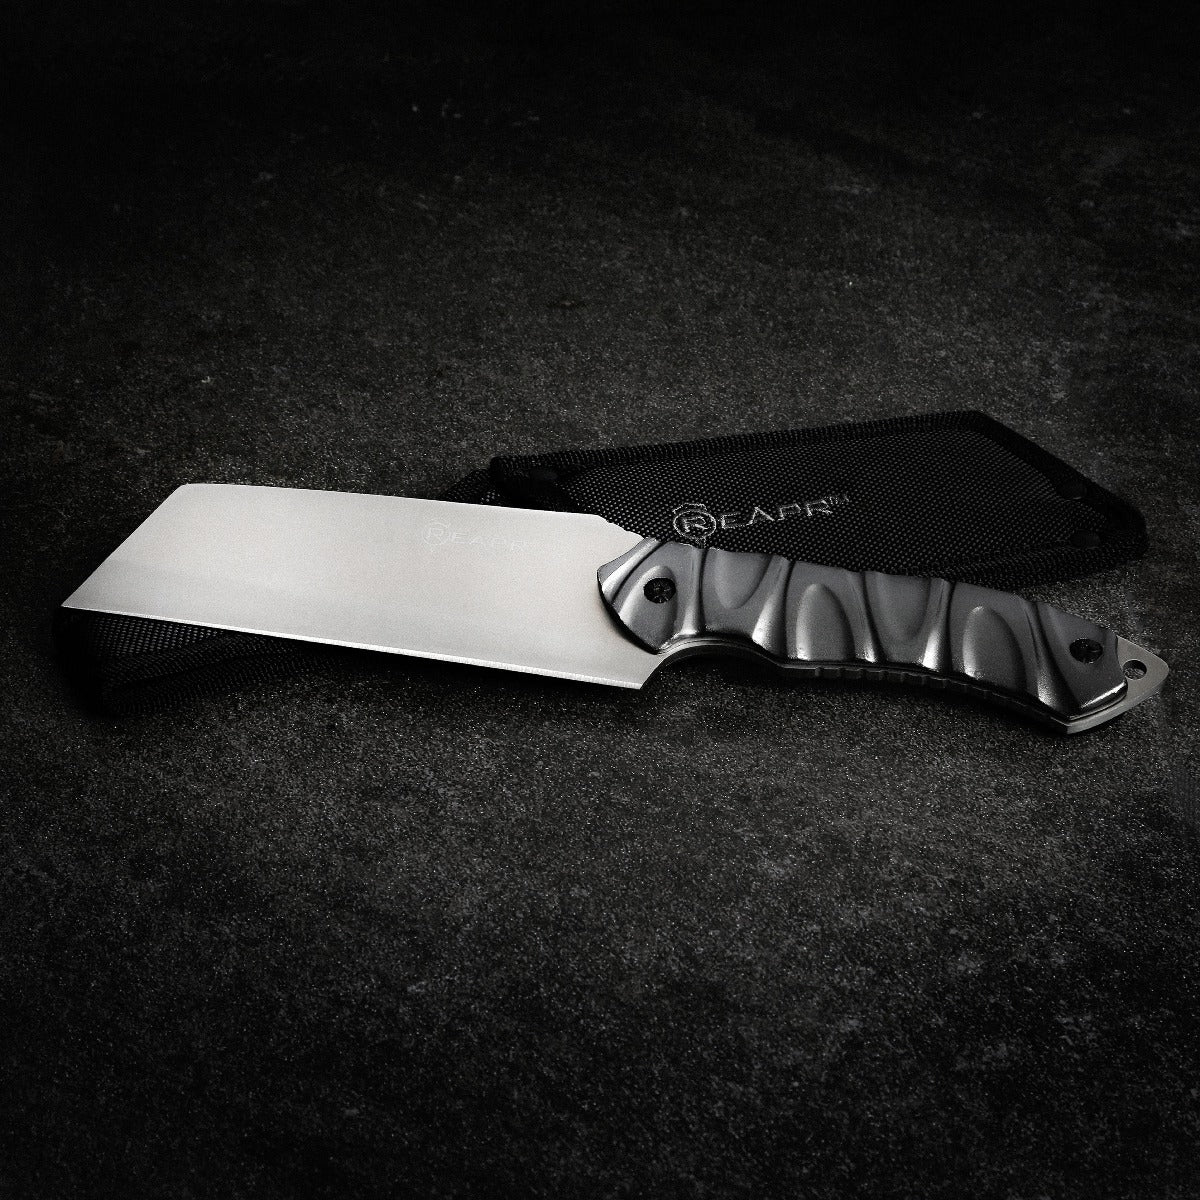 The Reapr JAMR Knife is the ultimate in versatile, tactical fixed-blade knives. The JAMR features an industry first modified cleaver blade, combining the functions of a cleaver, drop point knife and reverse tanto blade to meet a variety of demands, whether as a hunting knife, camping knife, and for guiding, tactical and survival use. www.defenceqstore.com.au